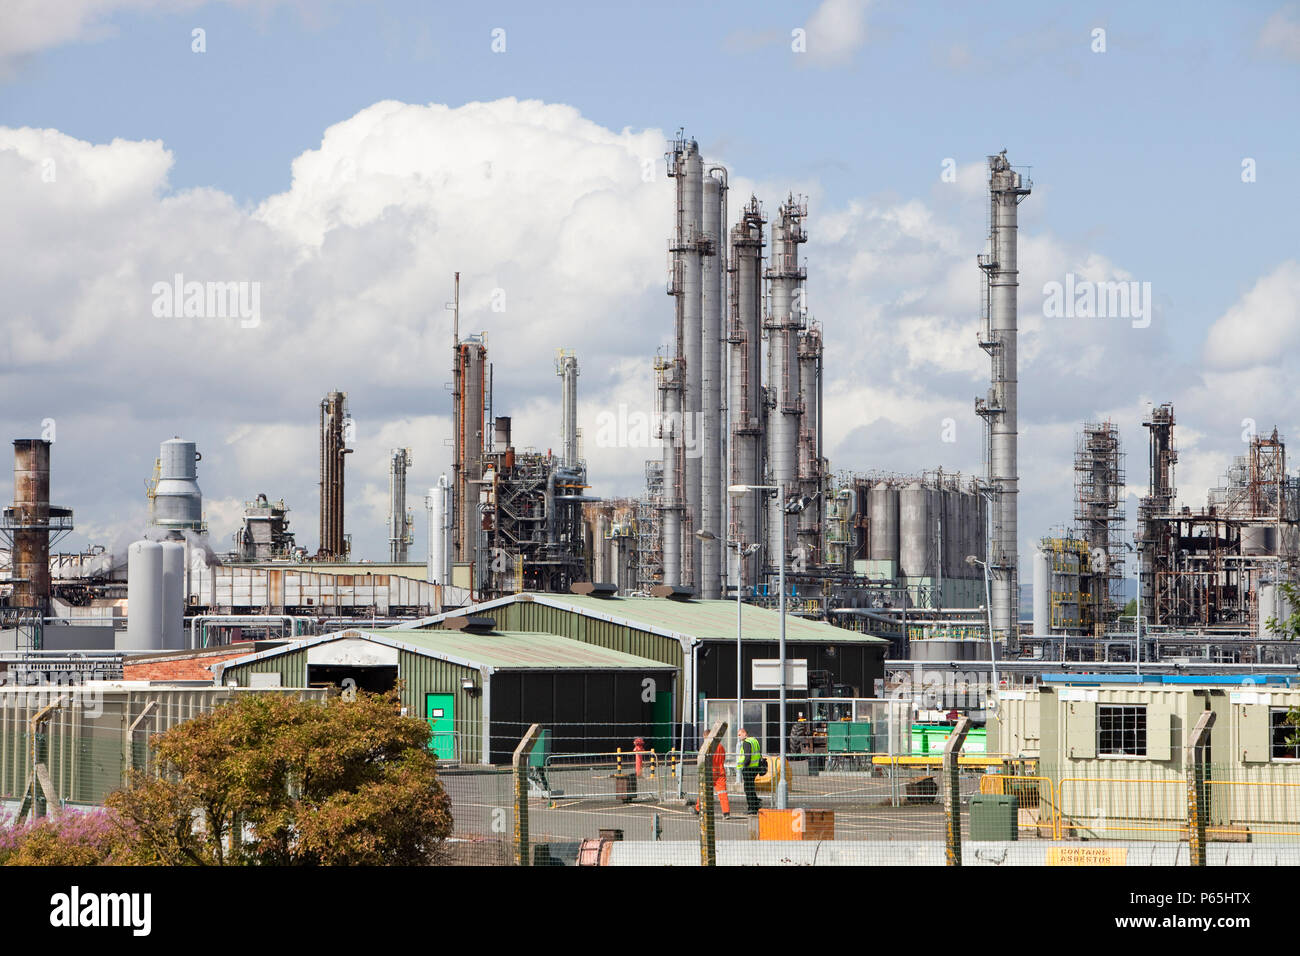 The Ineos oil refinery in Grangemouth Scotland, UK. The site is responsible for massive C02 emissions. Stock Photo